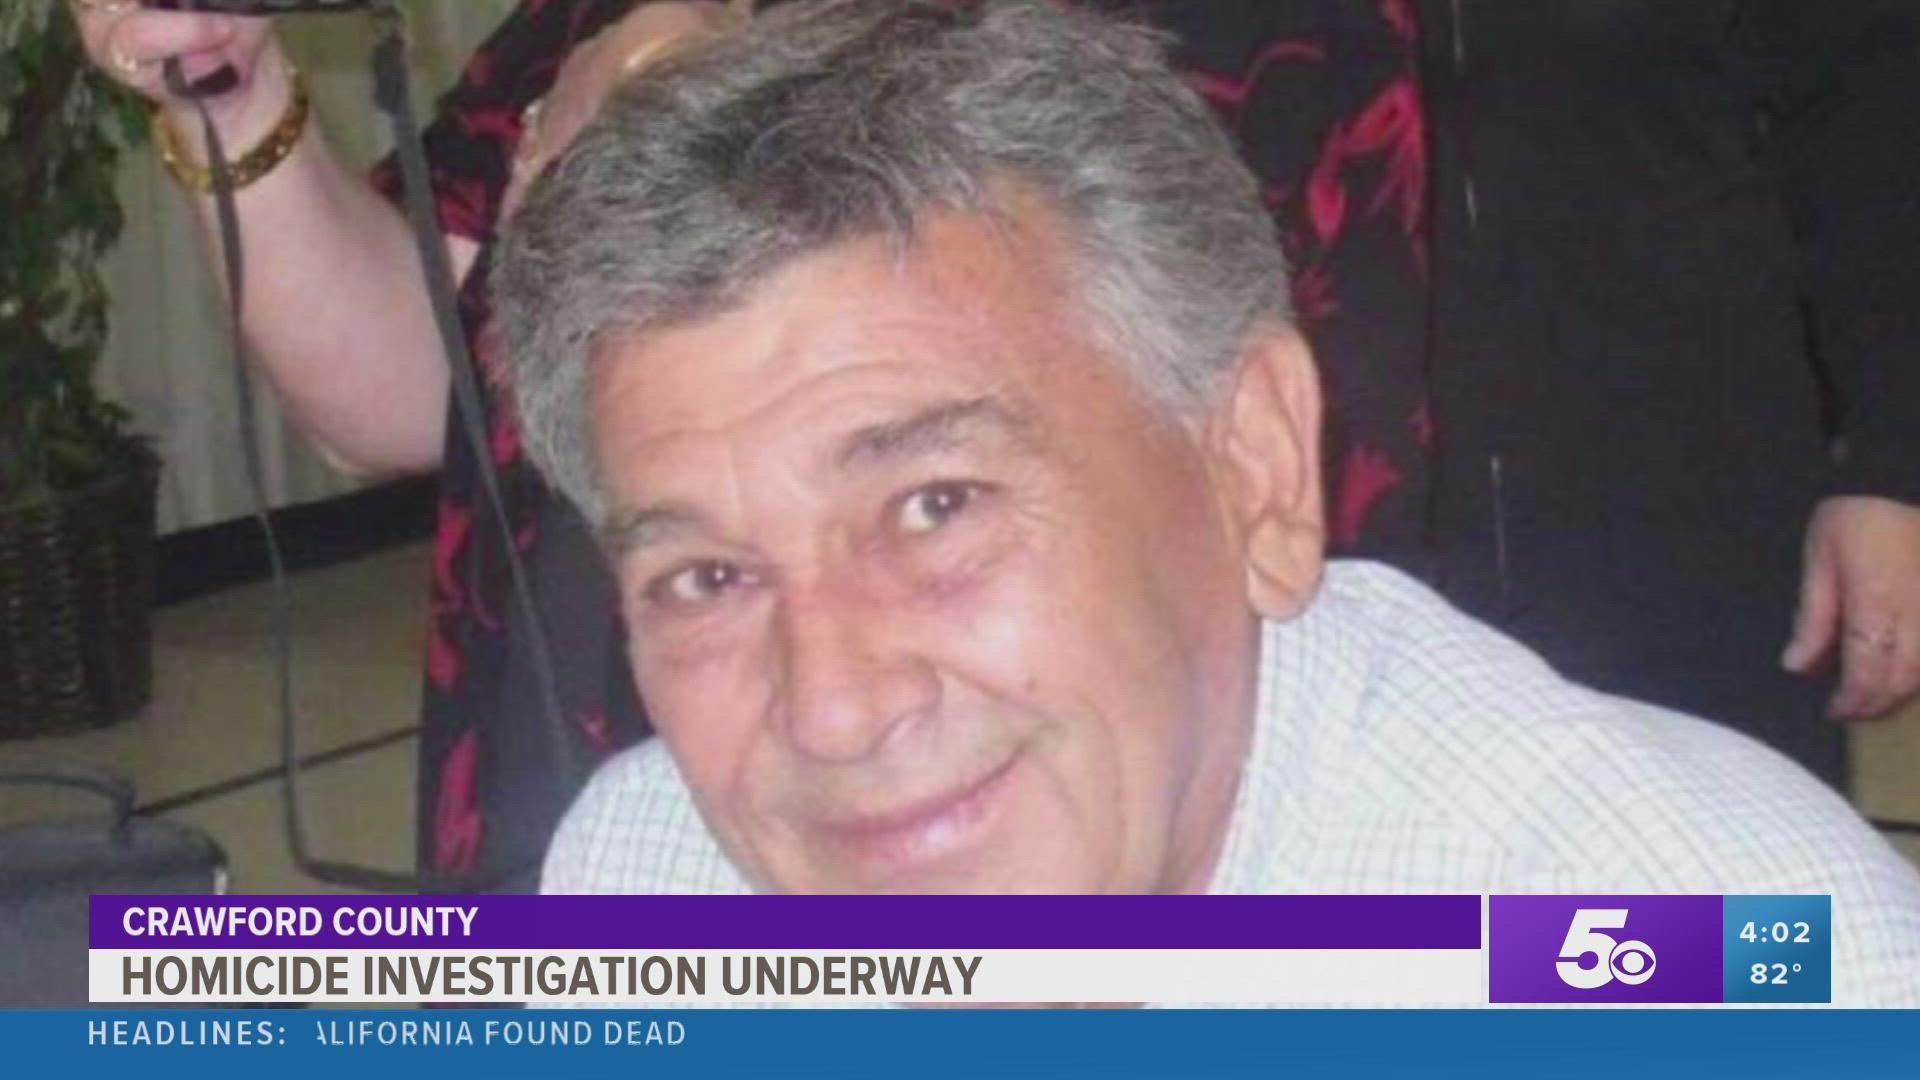 76-year-old Jerry Wiley was found in his home with multiple gunshot wounds.